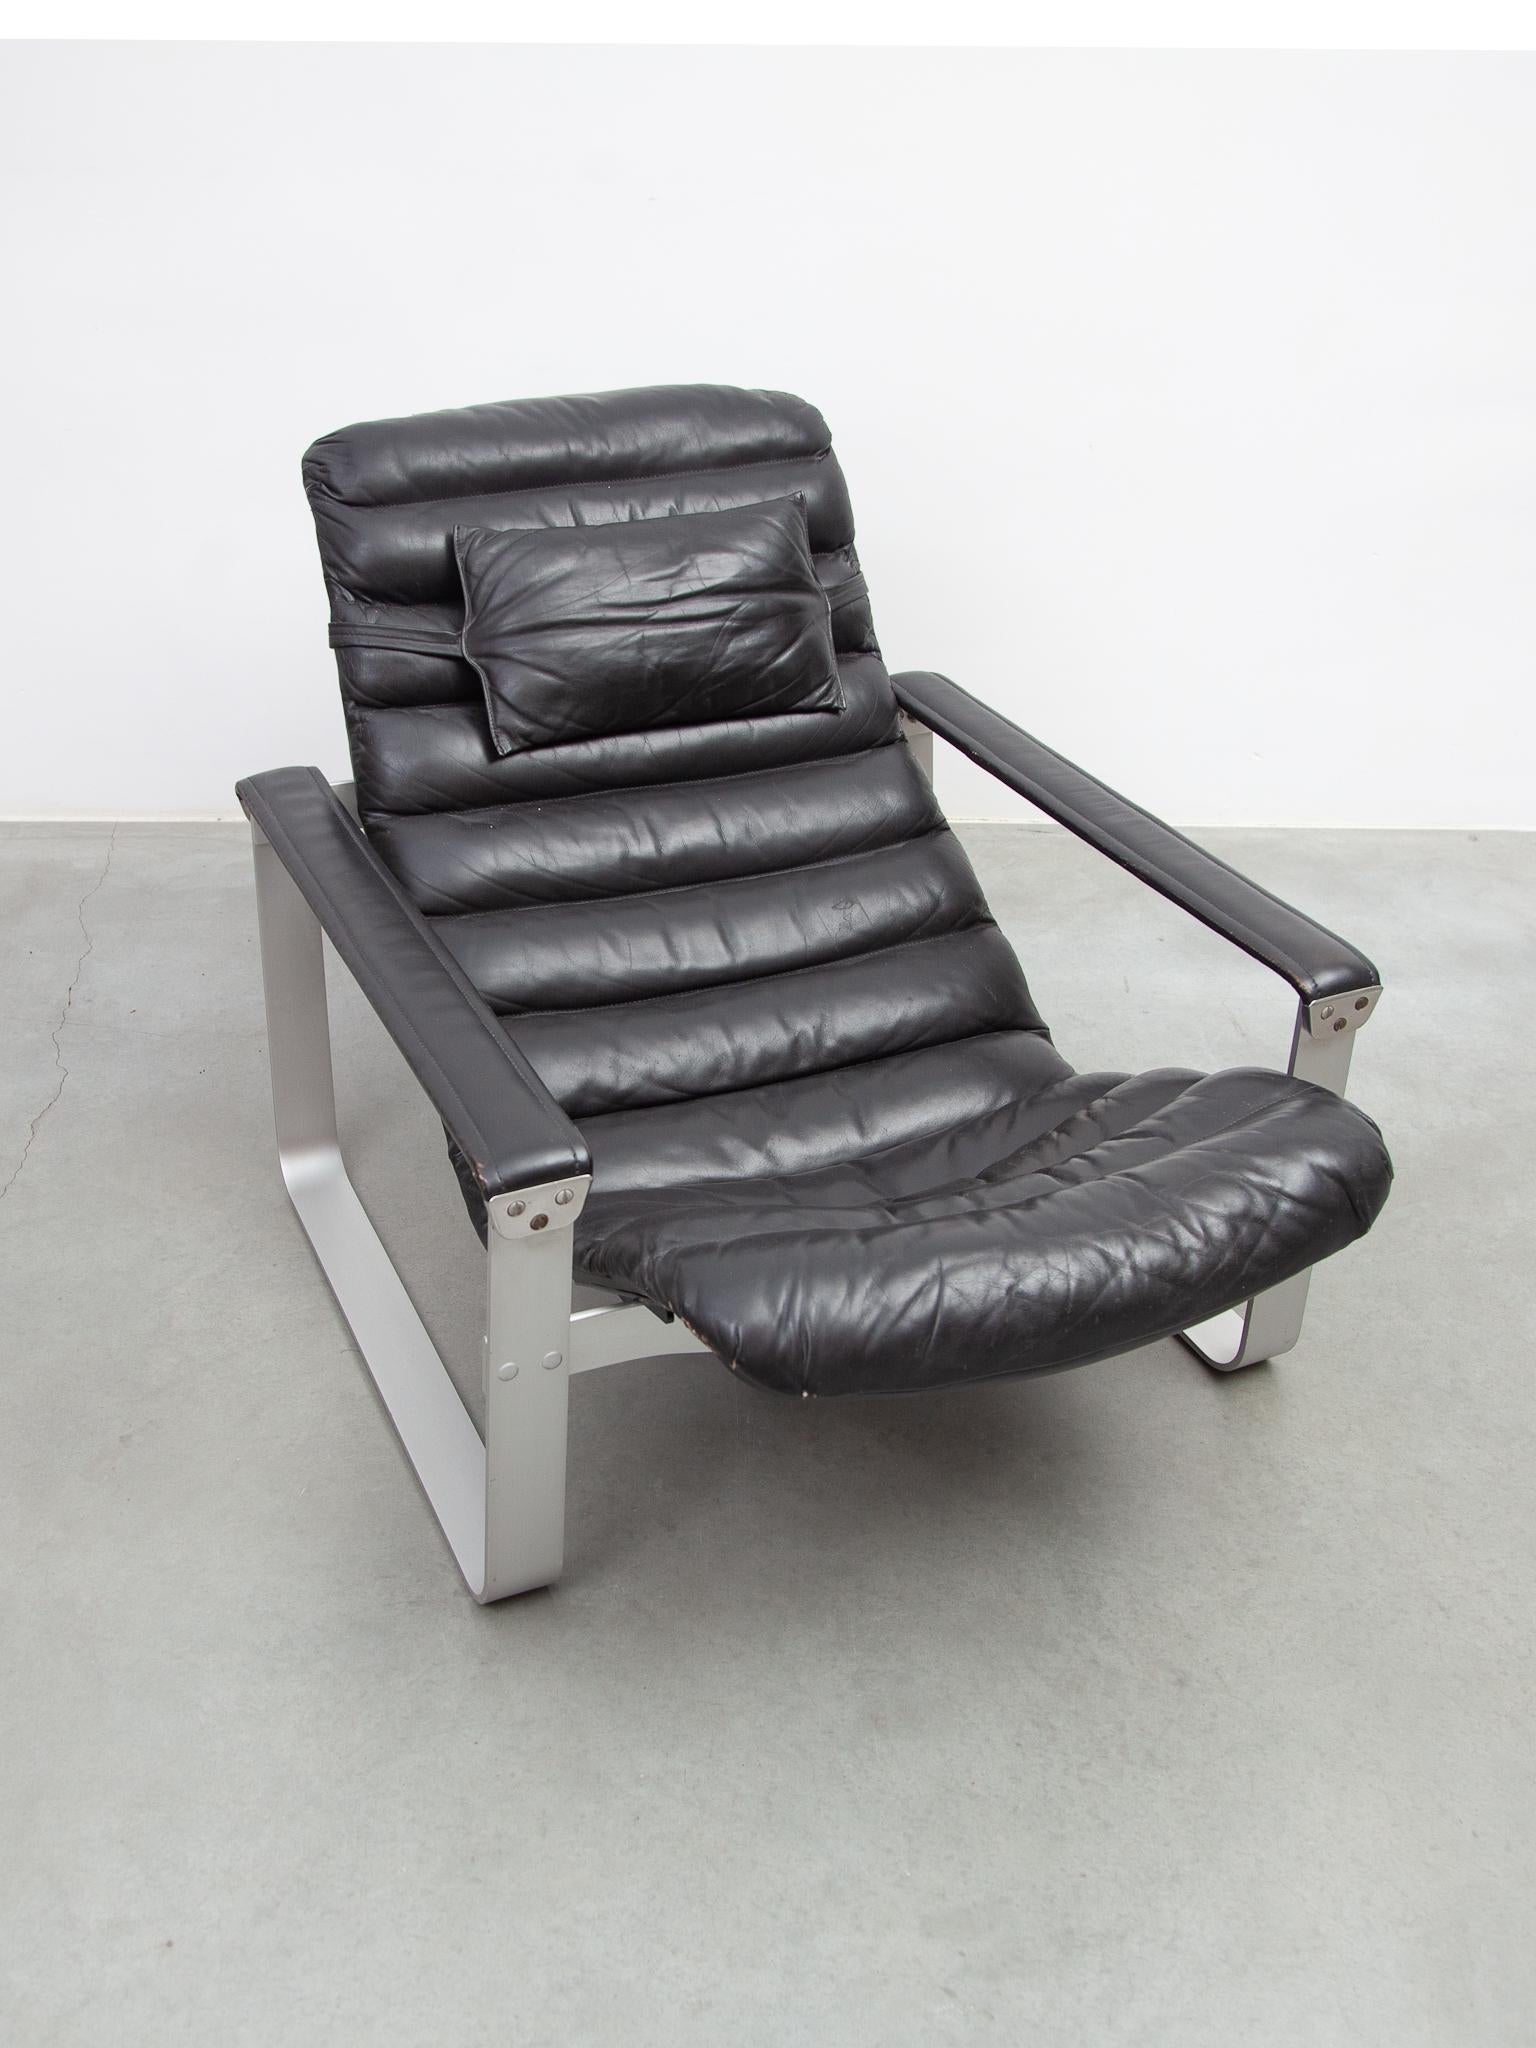 Aluminum Pulkka Lounge Chair designed by Ilmari Lappalainen by ASKO, Finland, 1968 For Sale